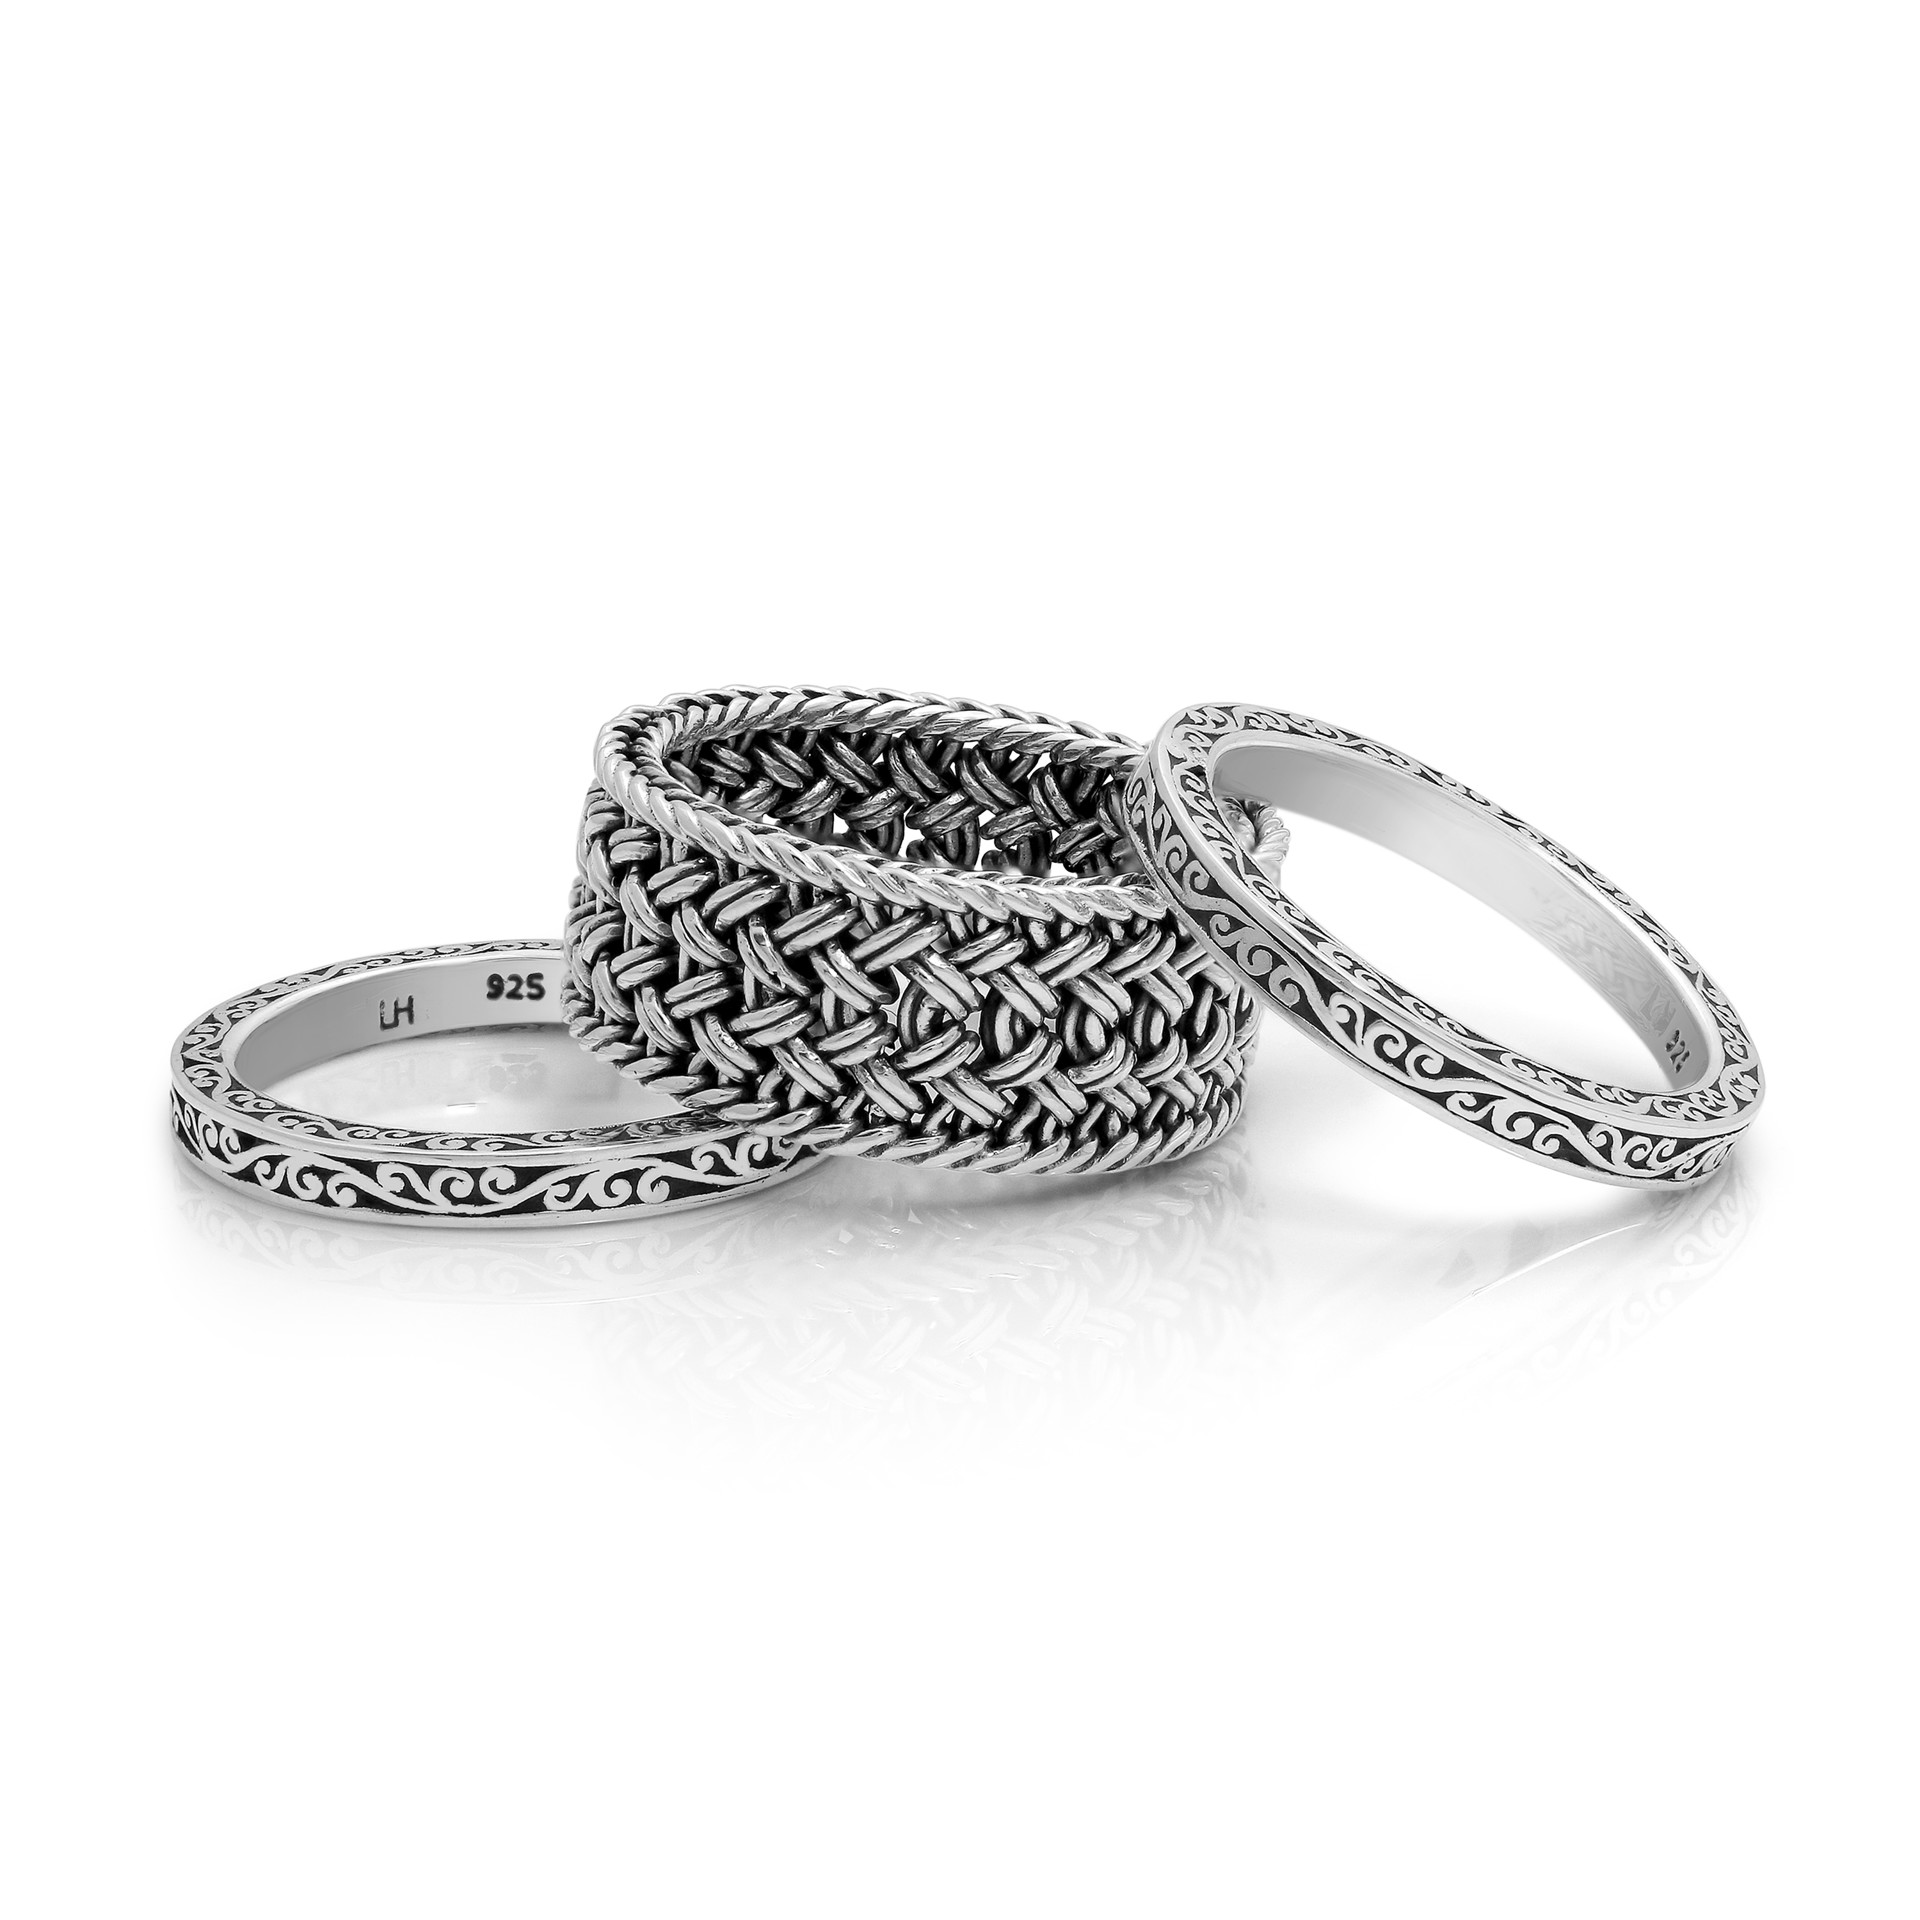 9755 Sterling Silver Stackable Rings Set of 3 by Lois Hill